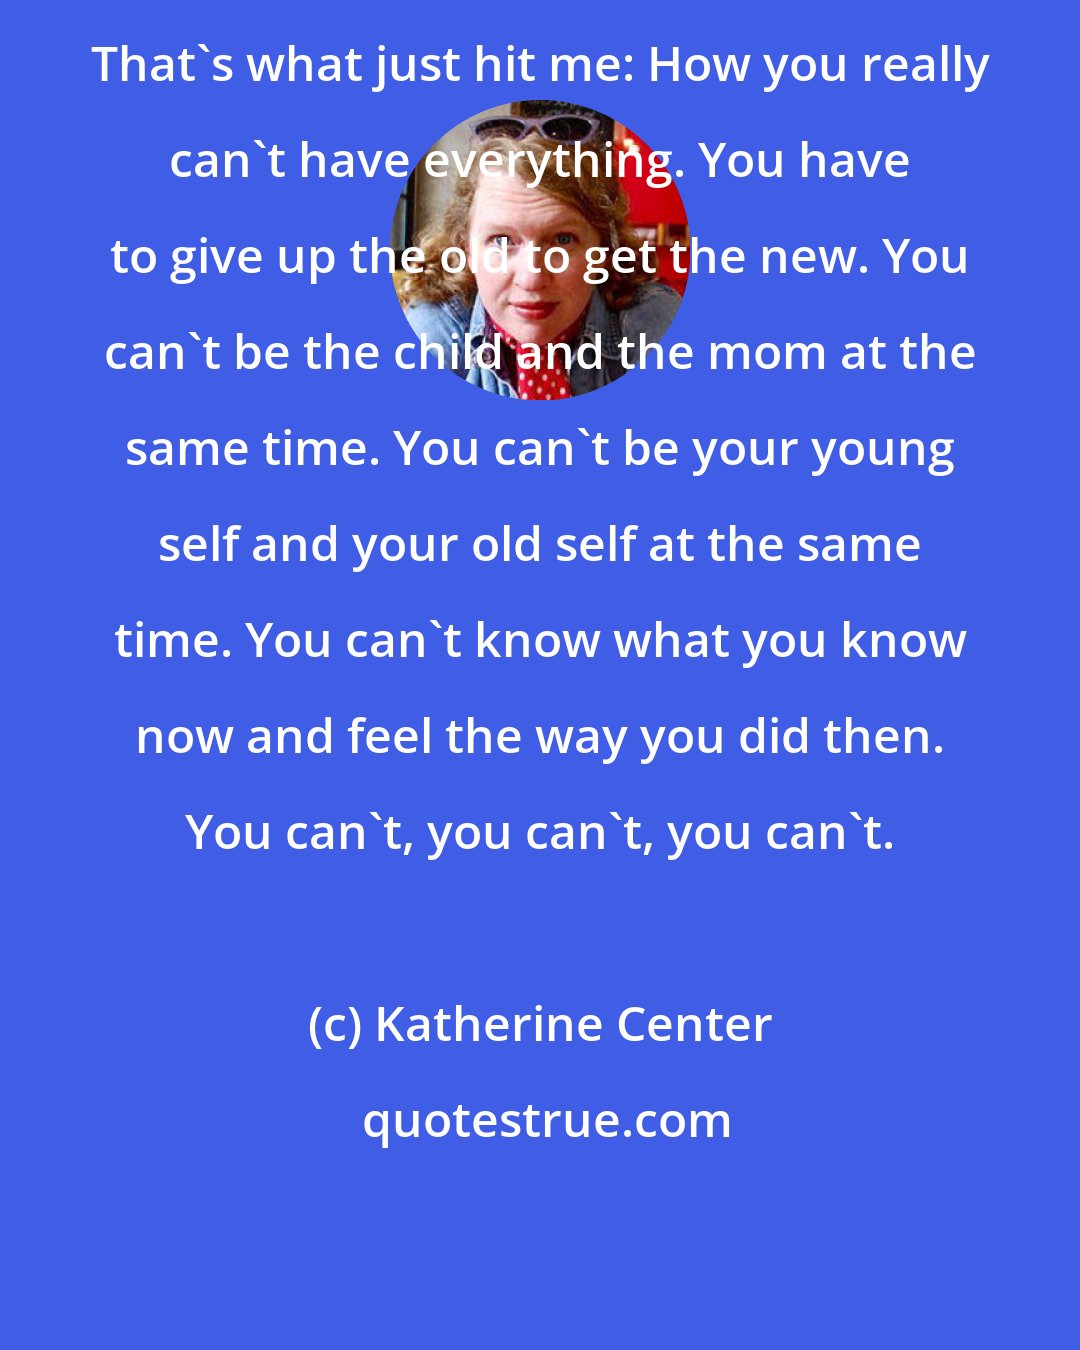 Katherine Center: That's what just hit me: How you really can't have everything. You have to give up the old to get the new. You can't be the child and the mom at the same time. You can't be your young self and your old self at the same time. You can't know what you know now and feel the way you did then. You can't, you can't, you can't.